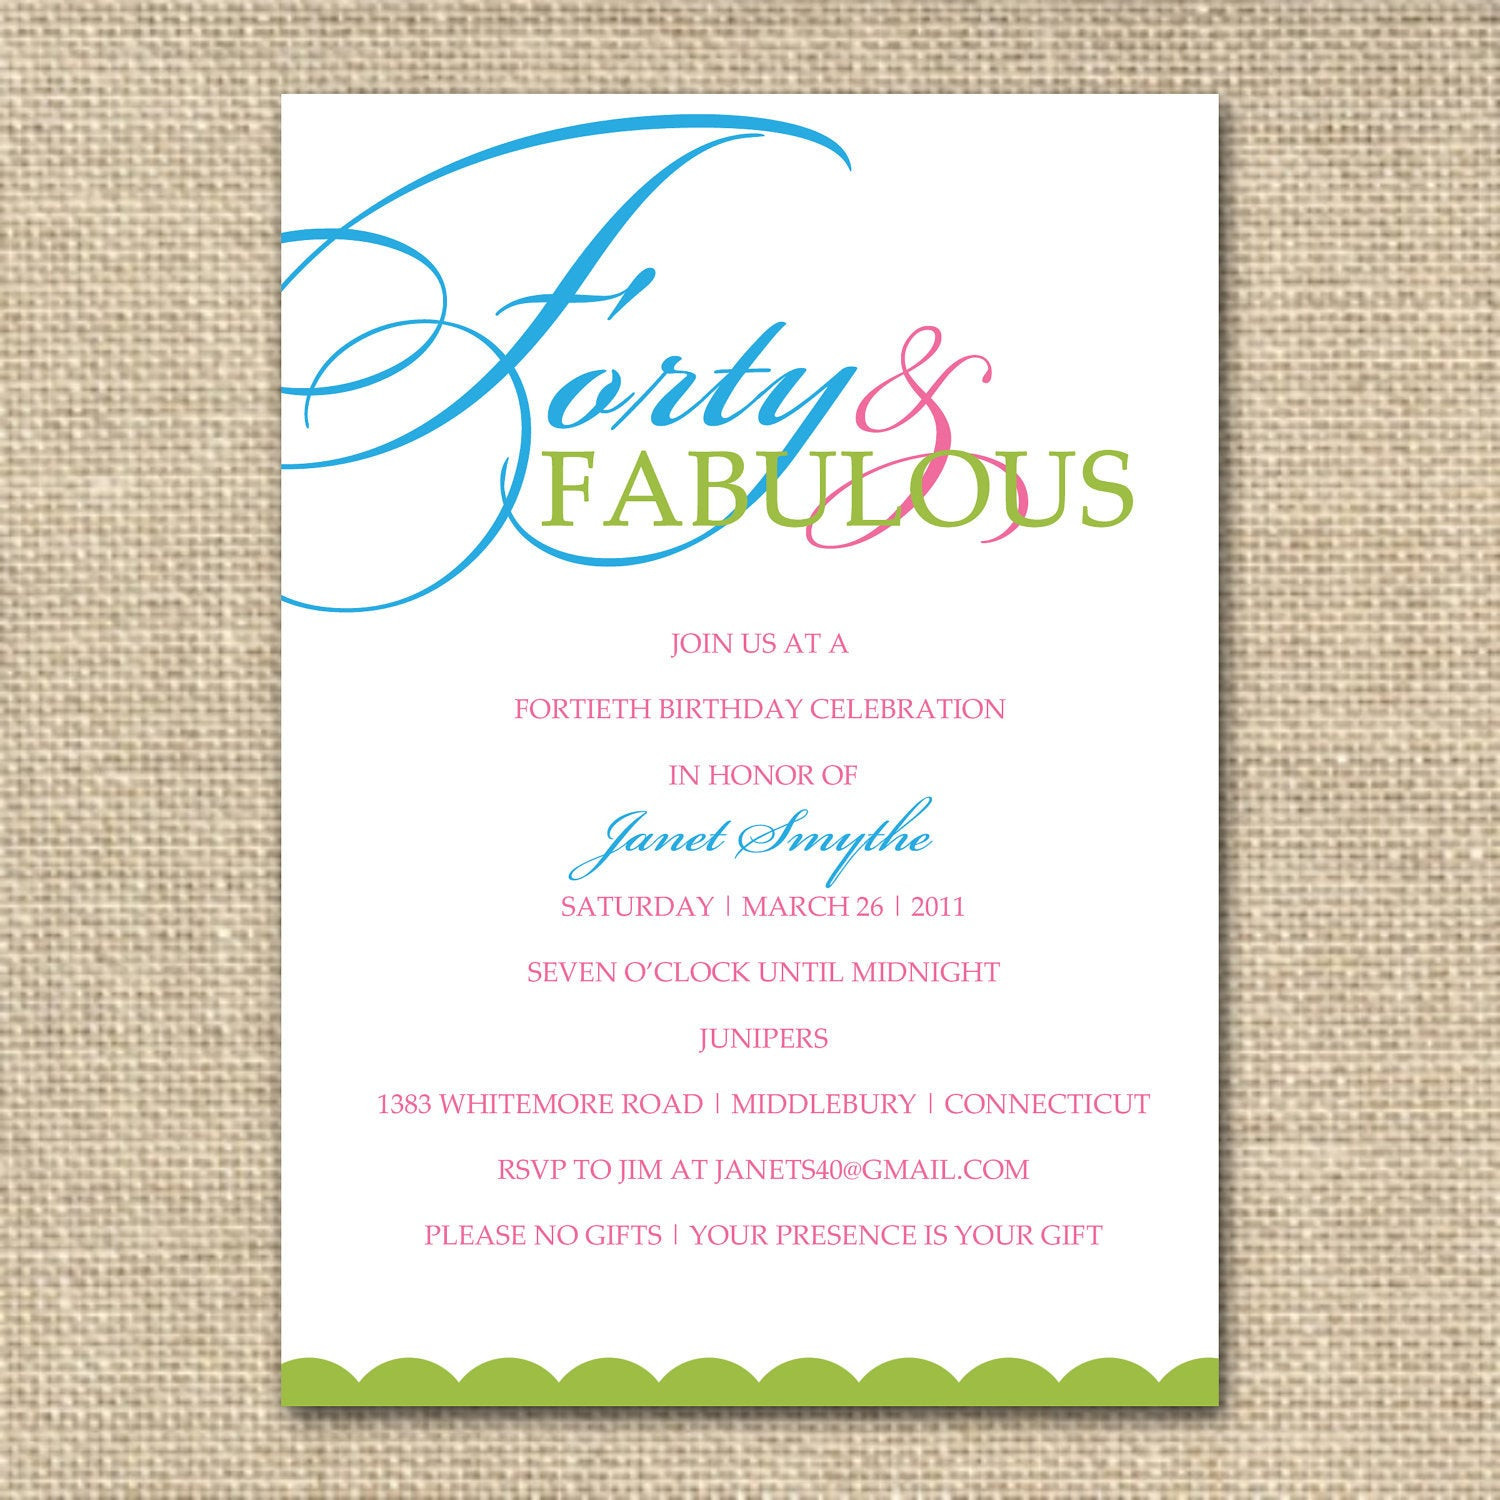 40th Birthday Party Invitation Wording
 40th Birthday Invitation Forty and Fabulous by